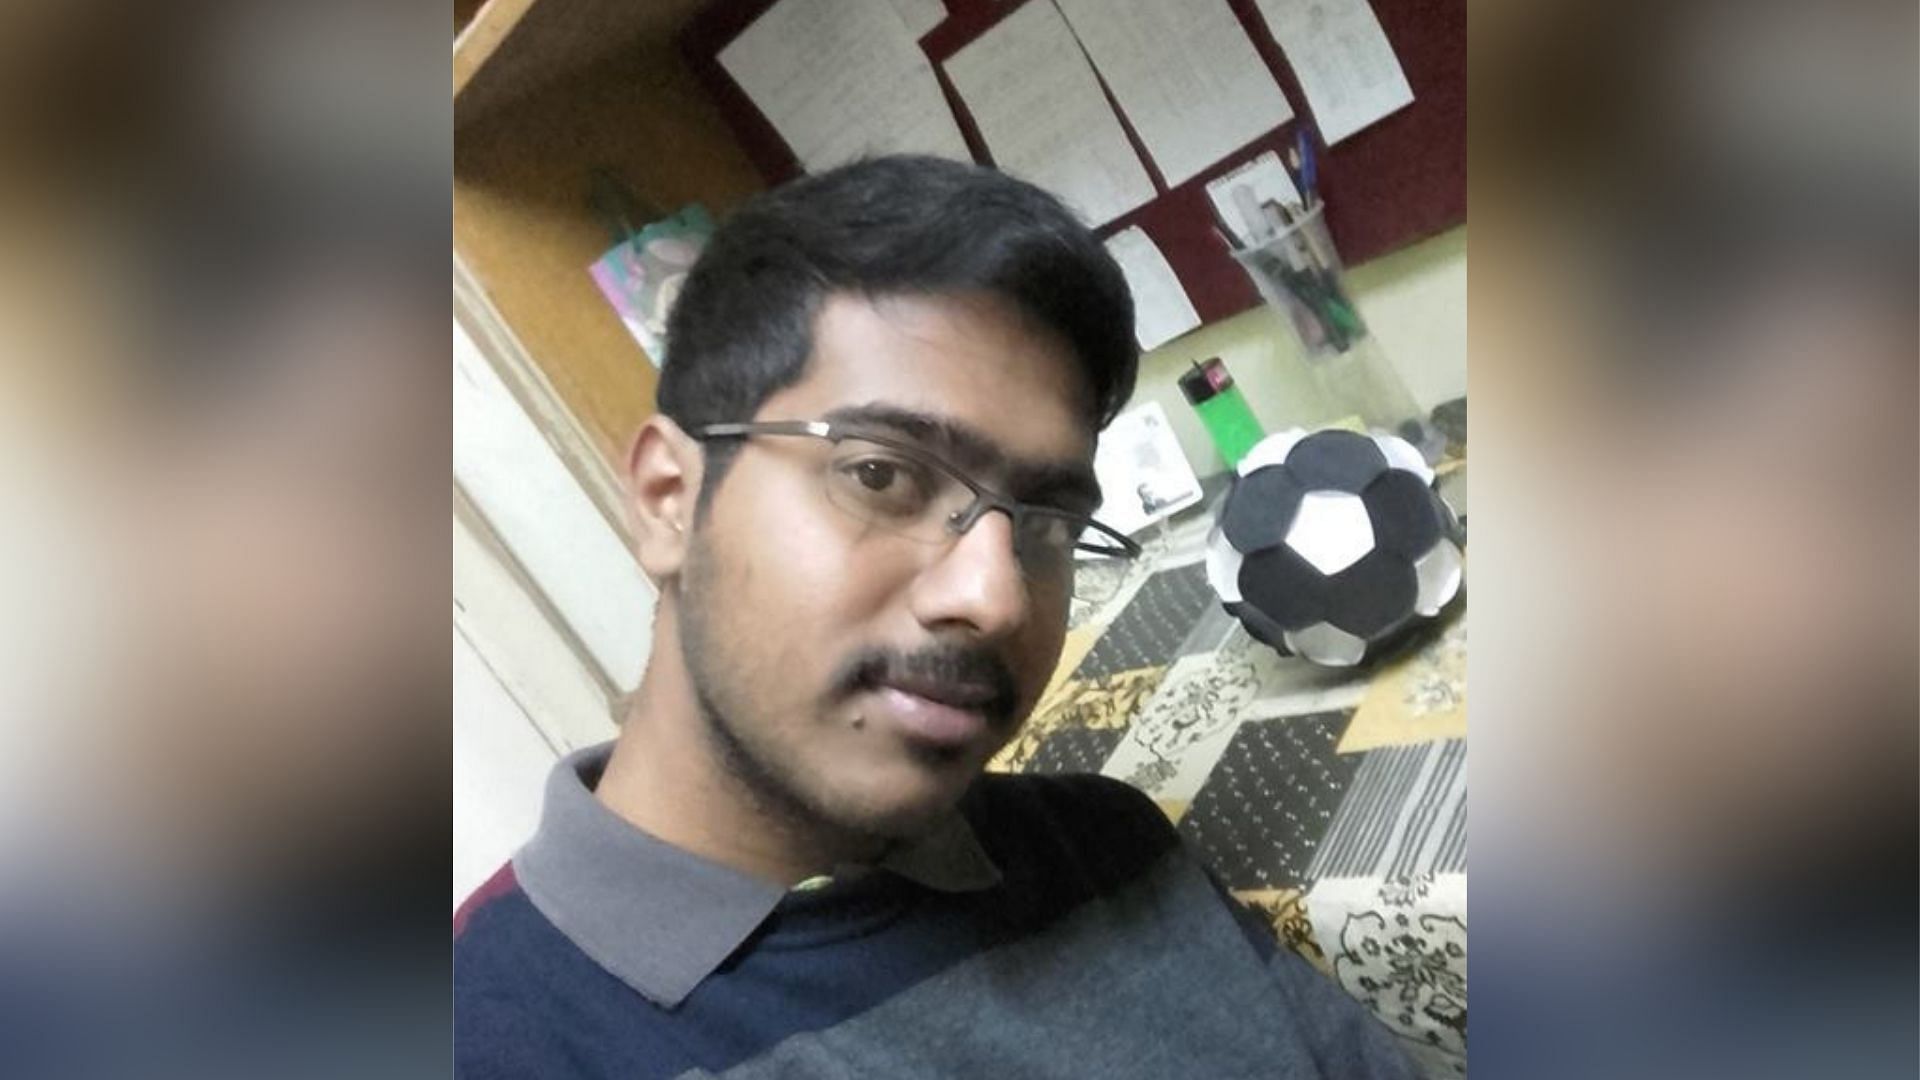 Alan Stanley (27), who hailed from Kottayam in Kerala, was found dead on tracks at Sarai Rohilla railway station on Saturday.